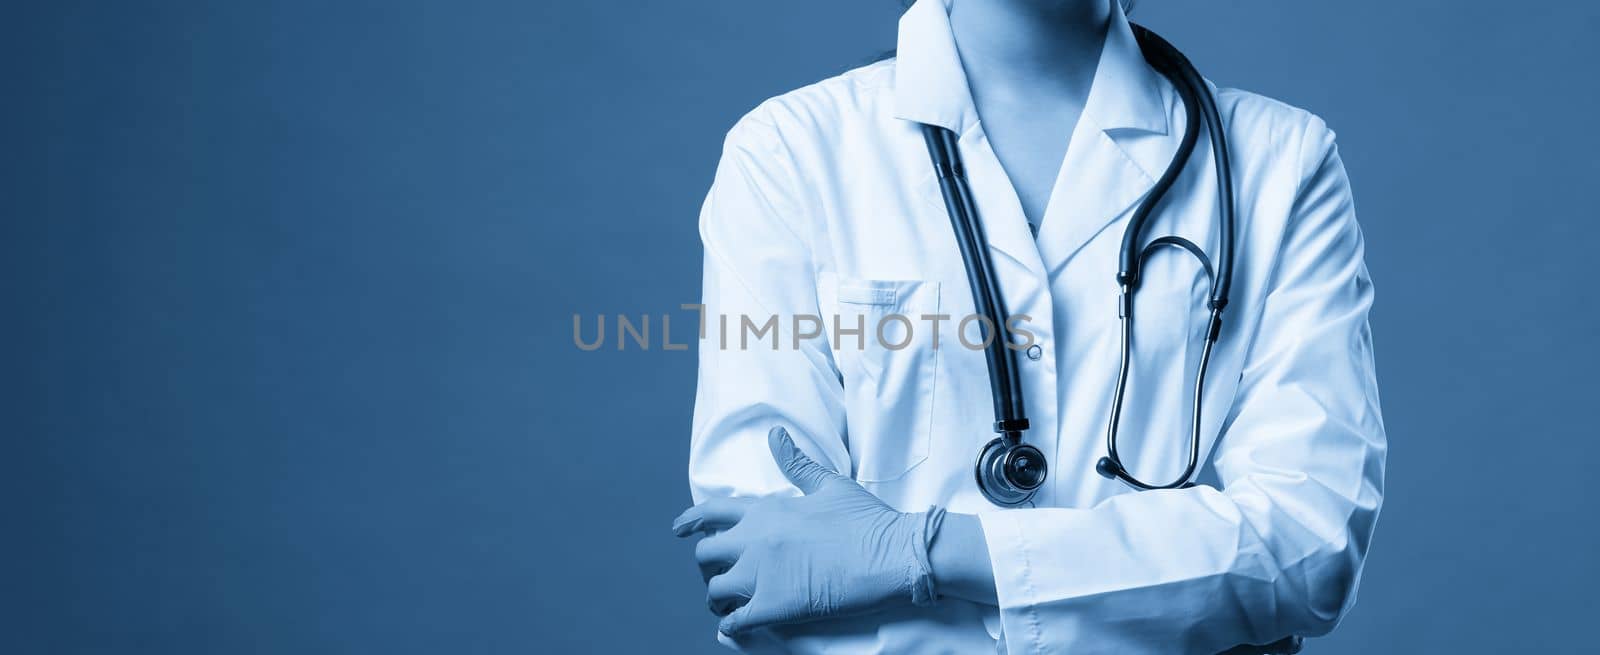 Young doctor against dark blue background, studio shot with copy space by Mariakray